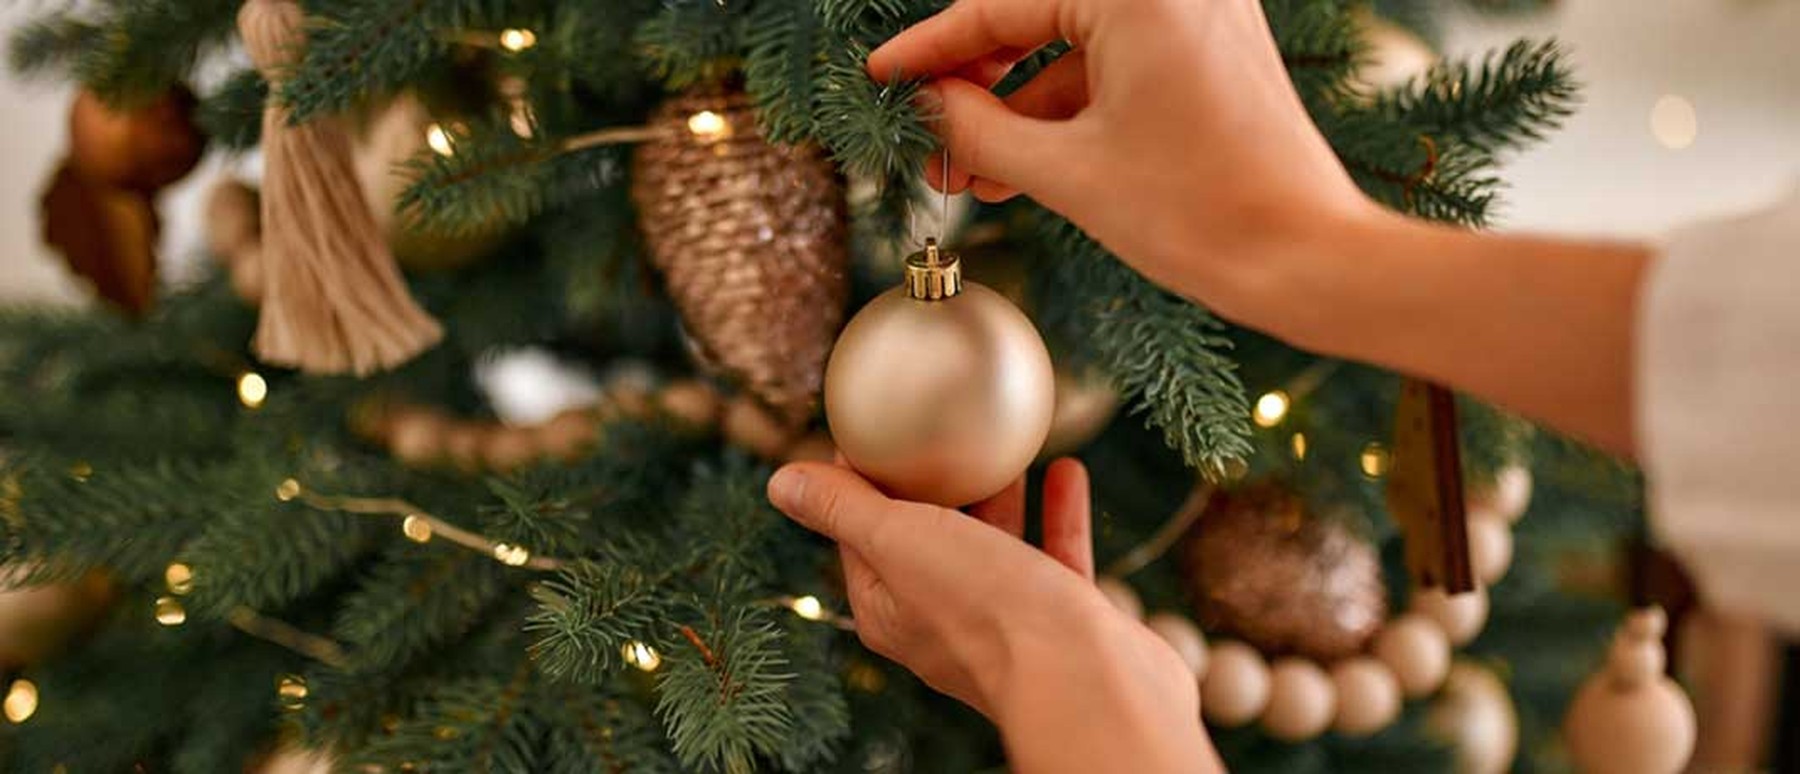 Woman putting ornaments on a Christmas tree